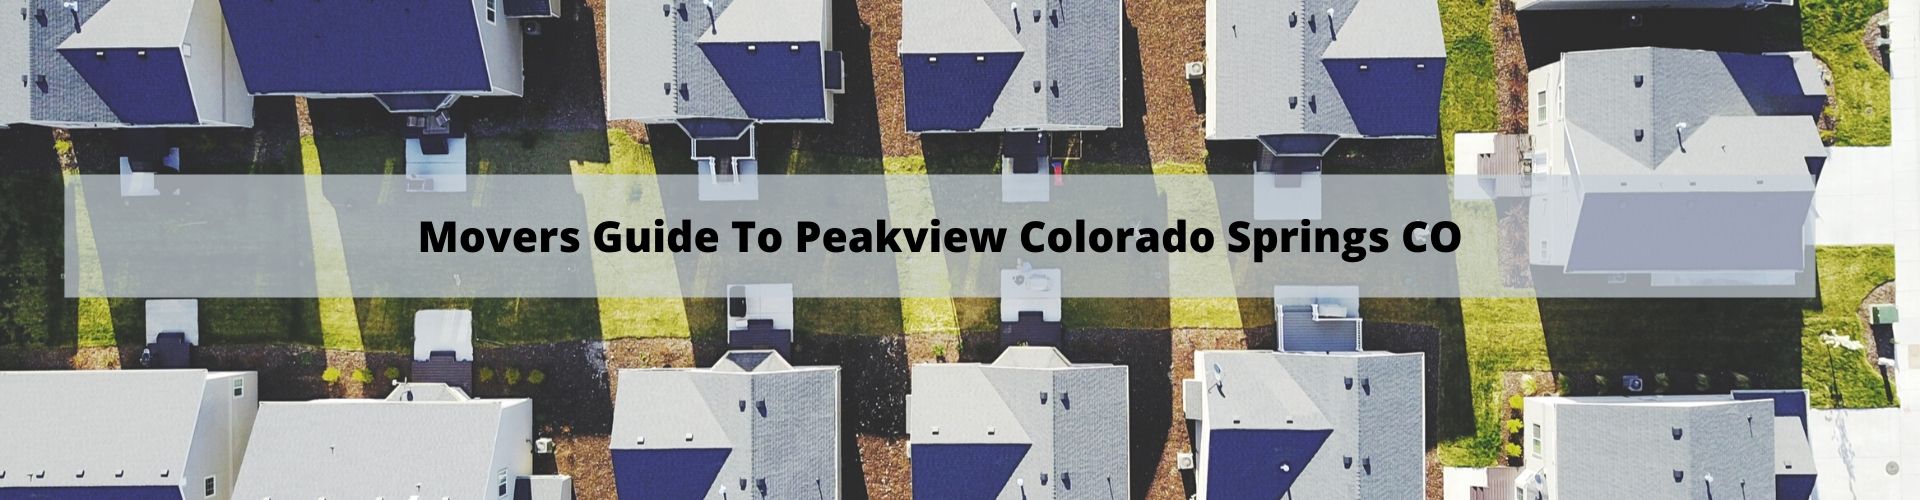 Peakview Movers Guide